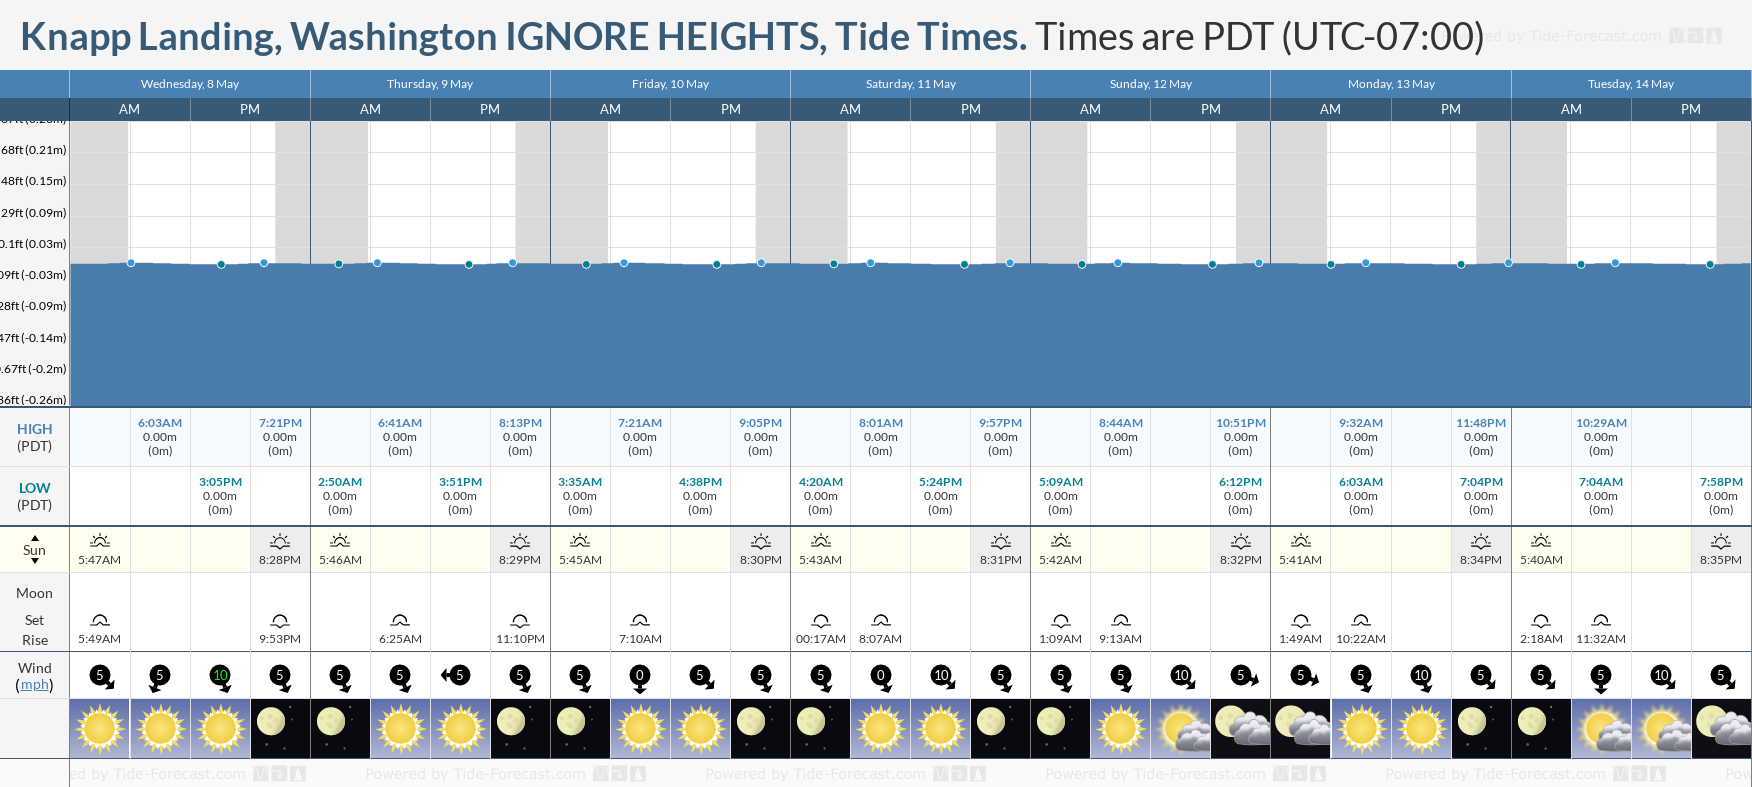 Knapp Landing, Washington IGNORE HEIGHTS Tide Chart including high and low tide tide times for the next 7 days